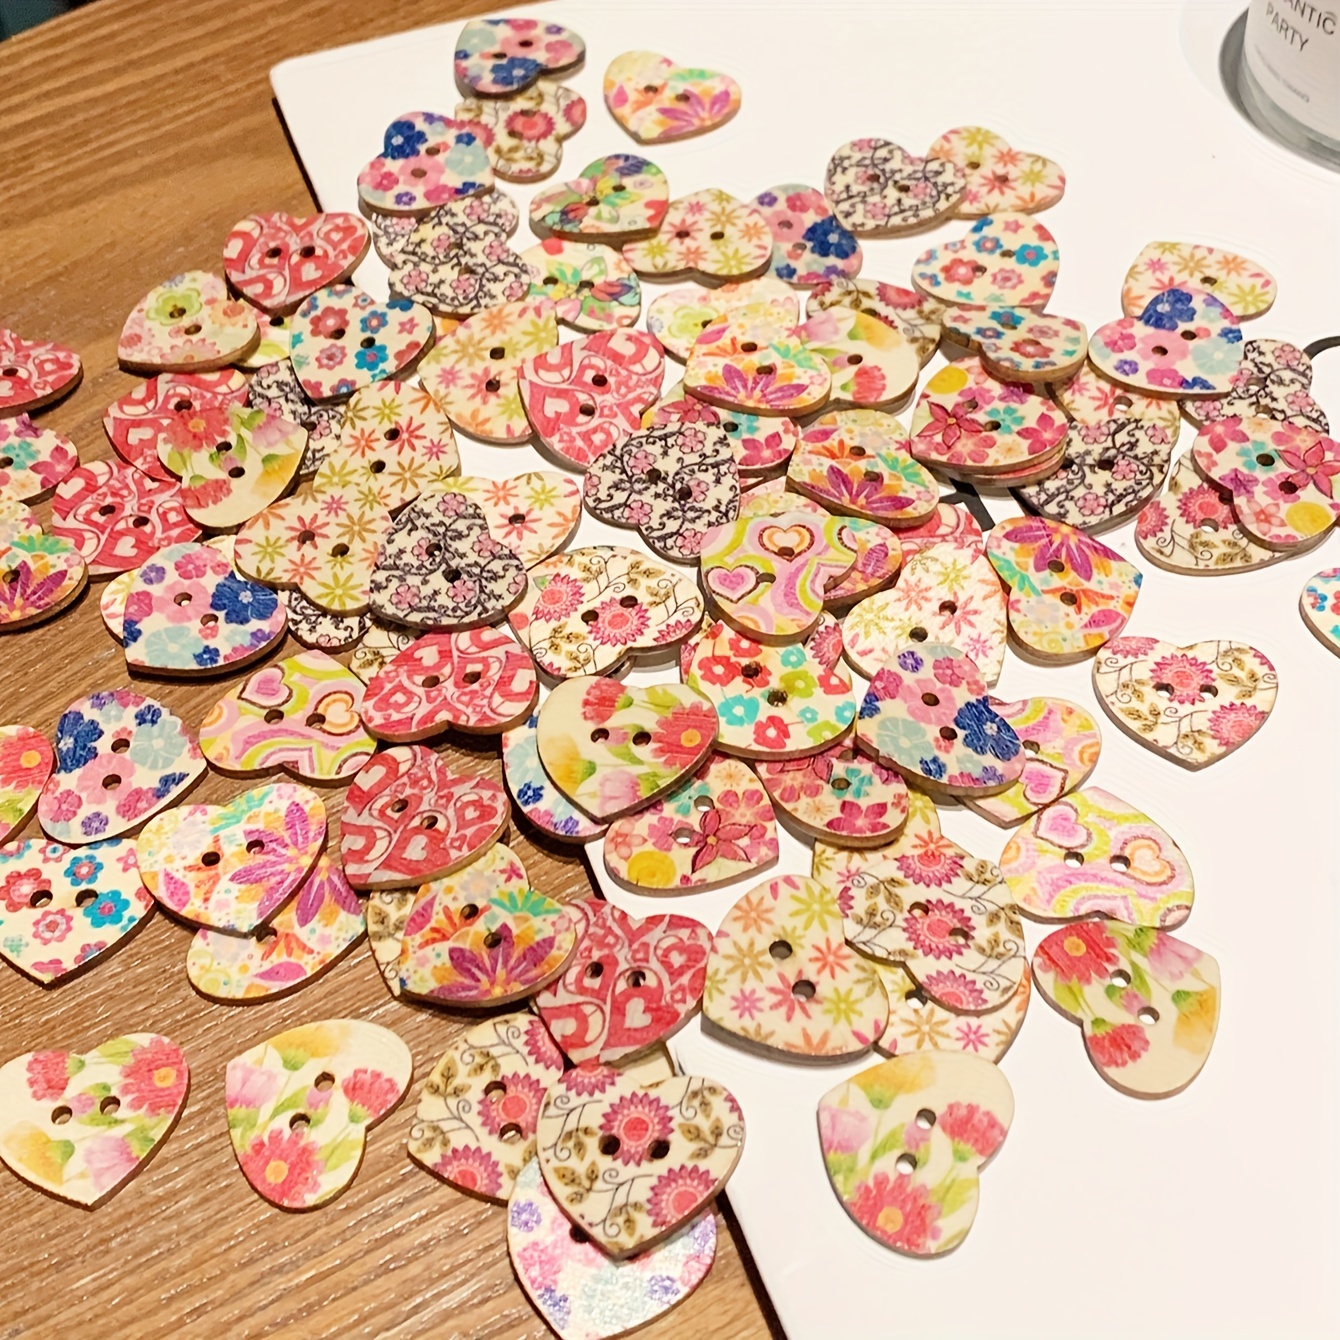 50pcs Wooden Heart Buttons With Cute Kawaii Colorful Owl Pattern, For DIY  Sewing Crafts